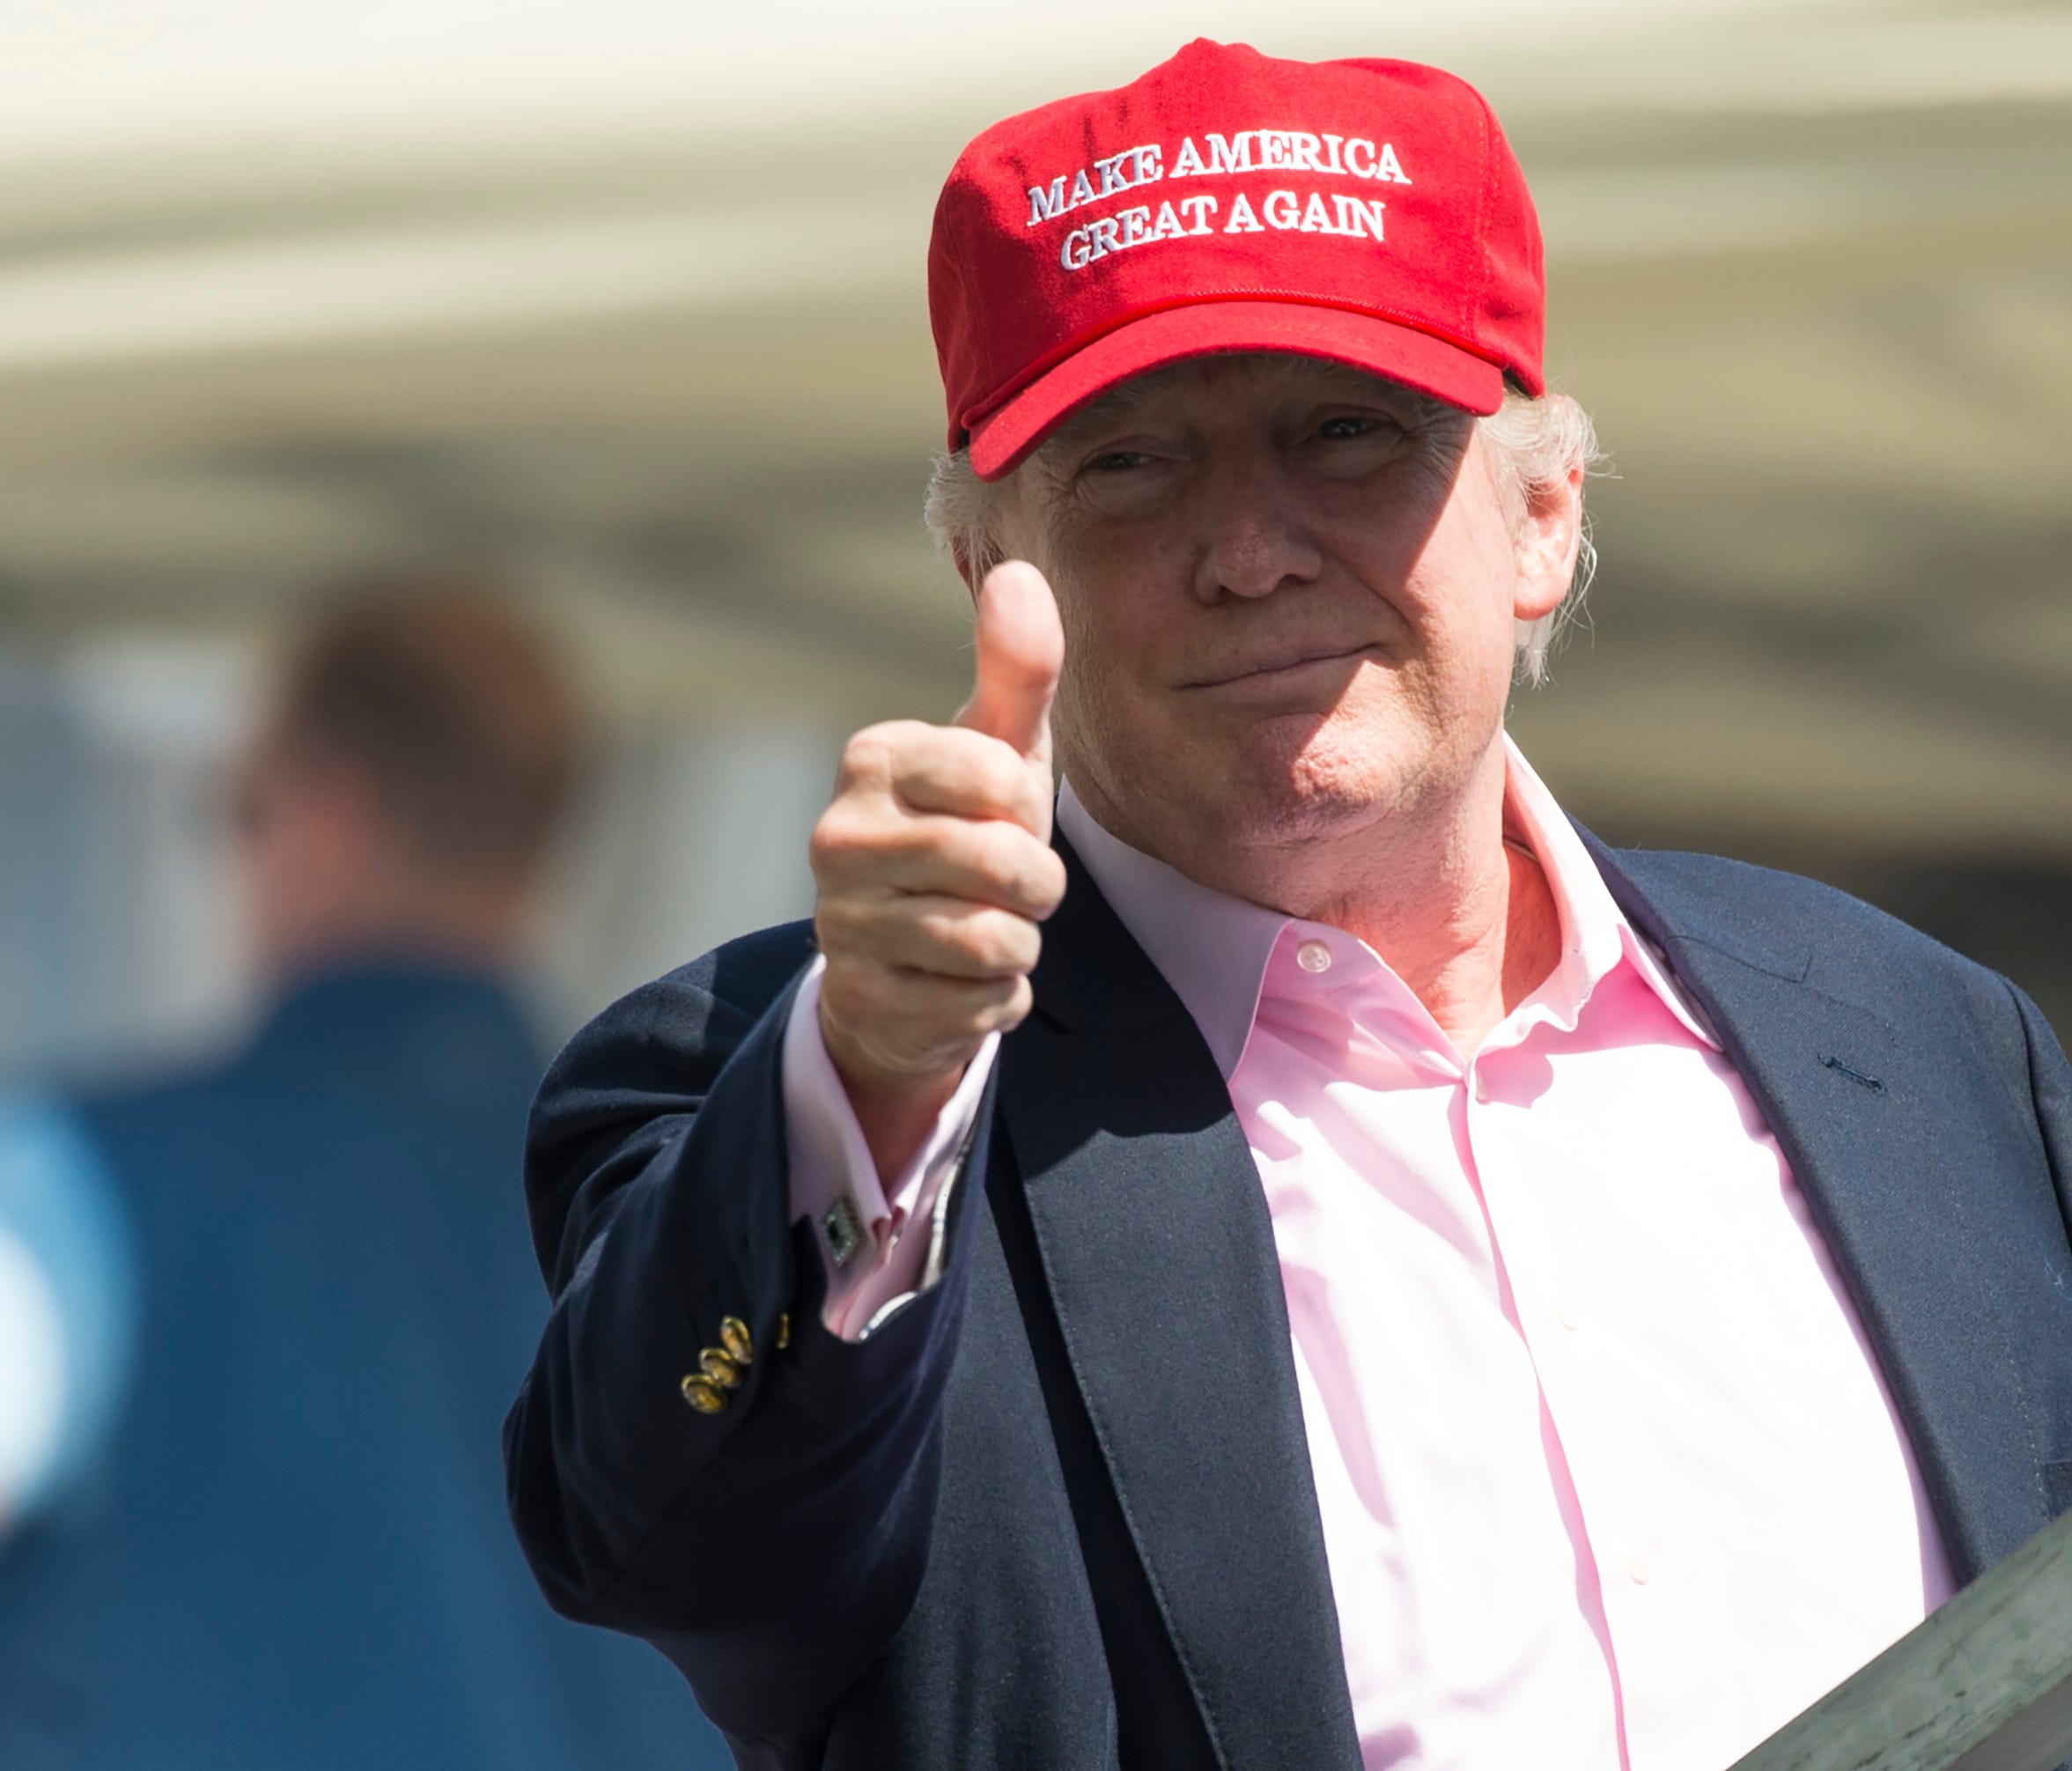 President Donald Trump gives a thumbs-up well wishers as he arrives at the 72nd US Women's Open Golf Championship at Trump National Golf Course in Bedminster, New Jersey, July 16, 2017.